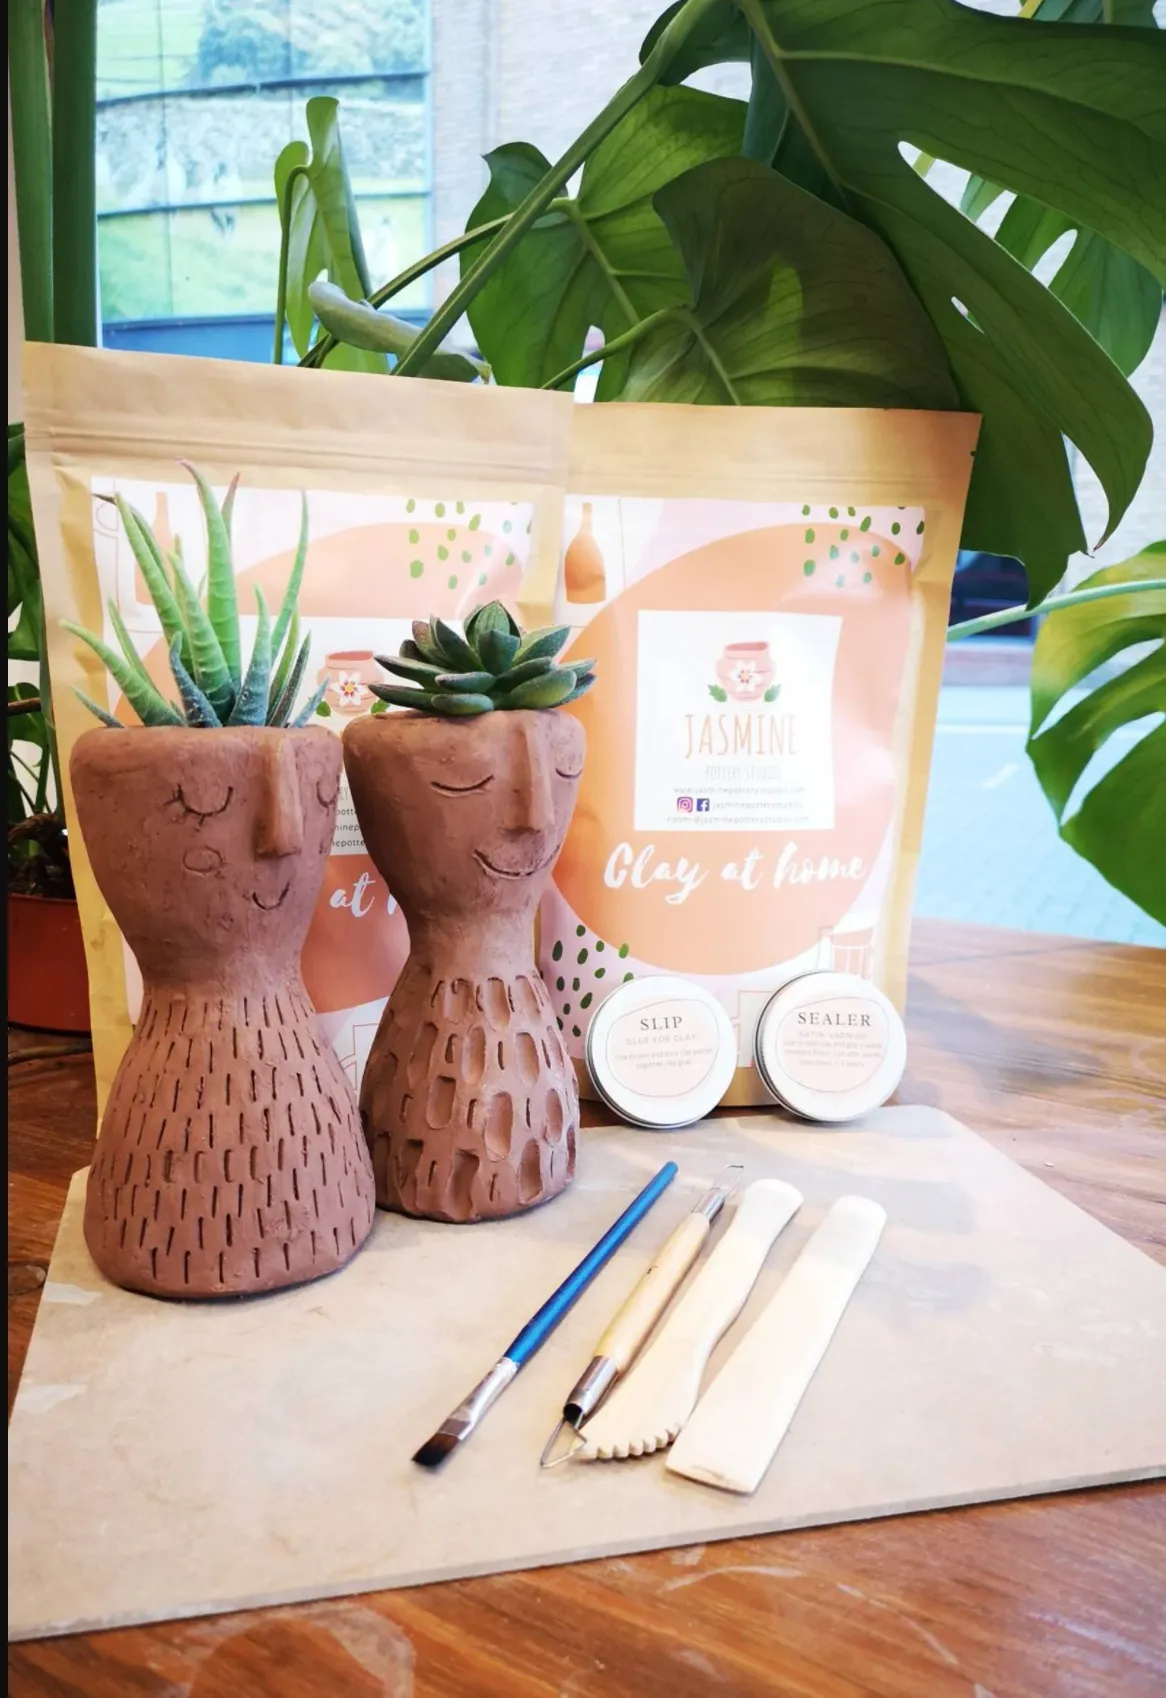 DIY vases clay at home pottery starter kit